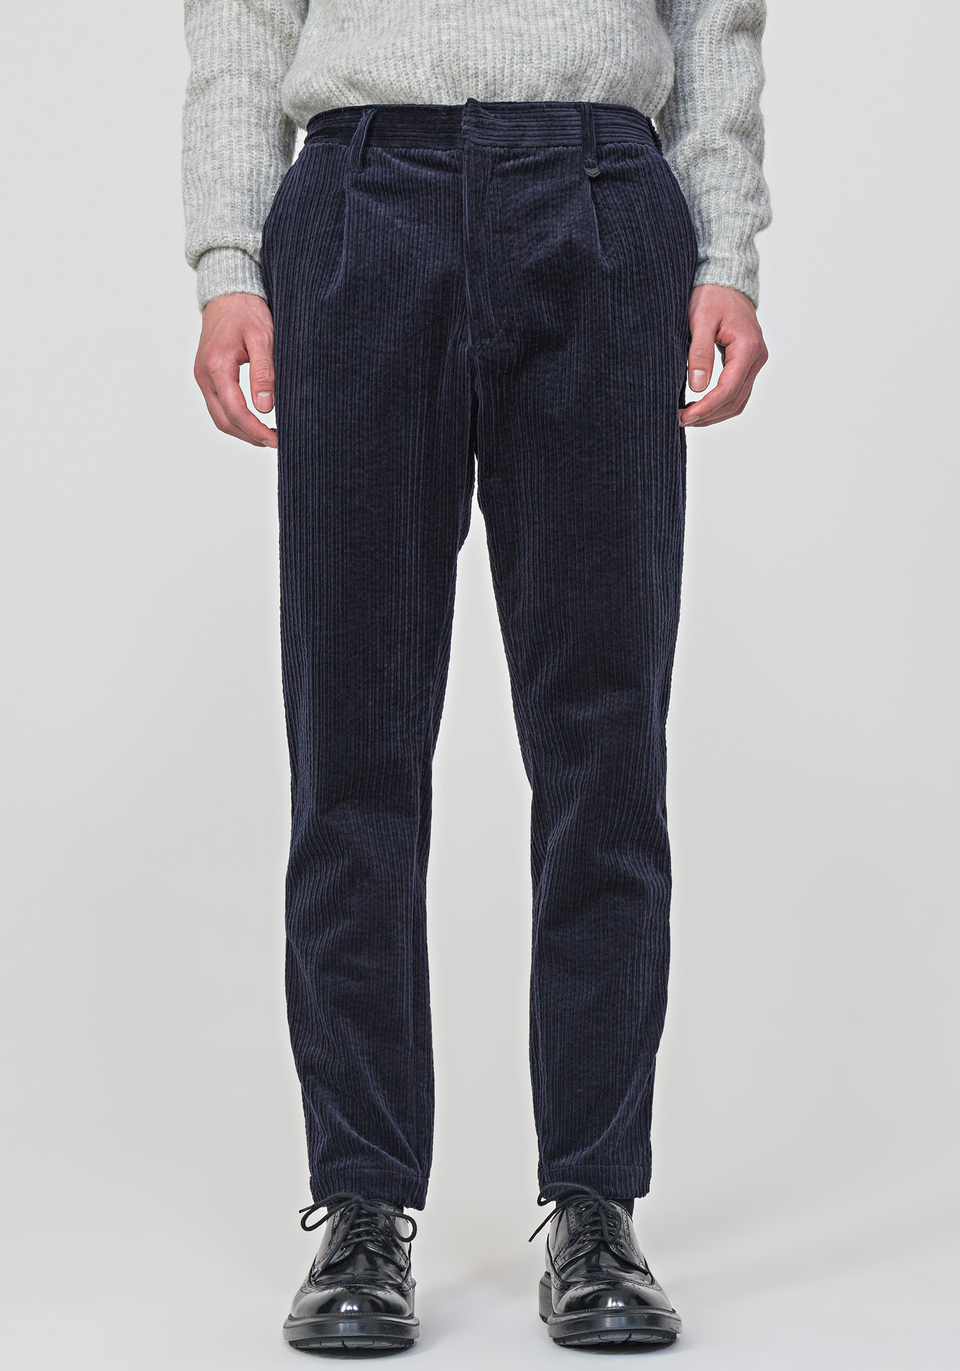 CARROT-FIT “RALPH” TROUSERS IN CORDUROY STRETCH FABRIC WITH AN ELASTICATED PANEL - Antony Morato Online Shop